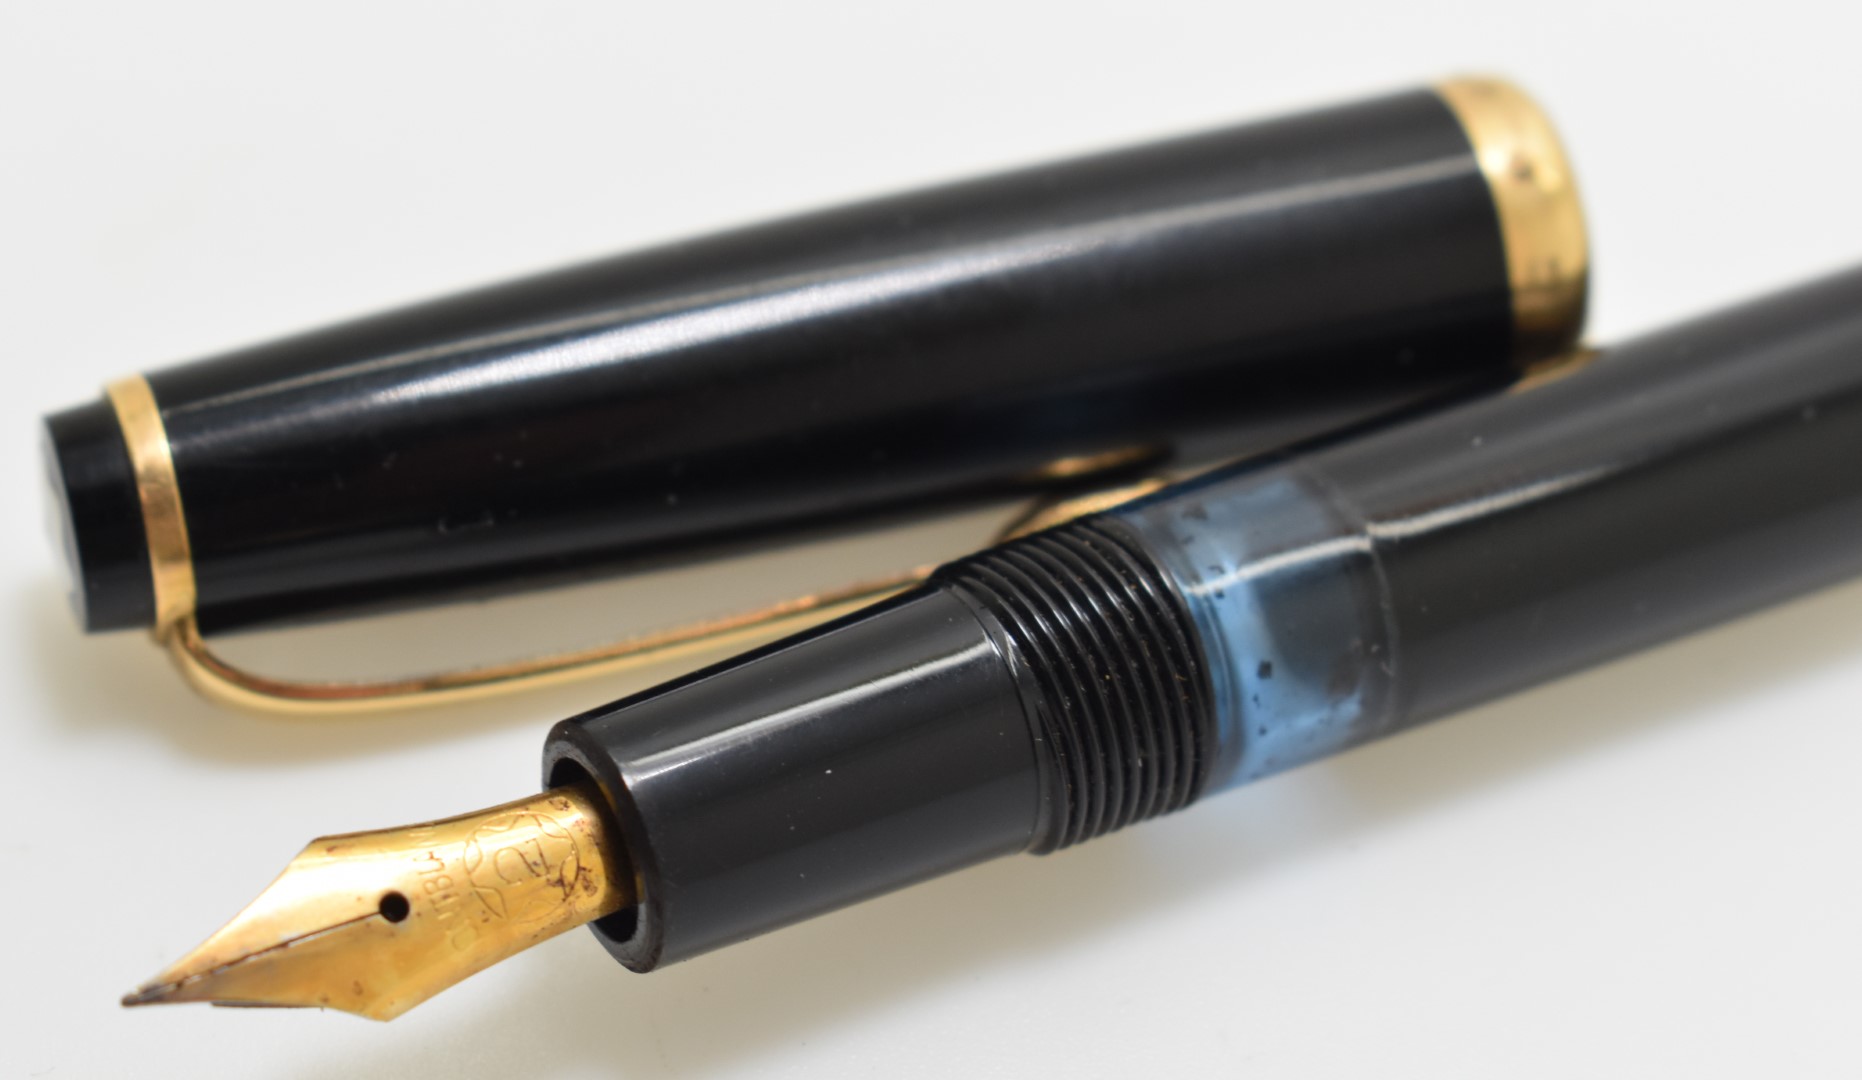 Montblanc 342 fountain pen with number 2 nib, black resin body and gold plated fittings, in original - Image 4 of 10